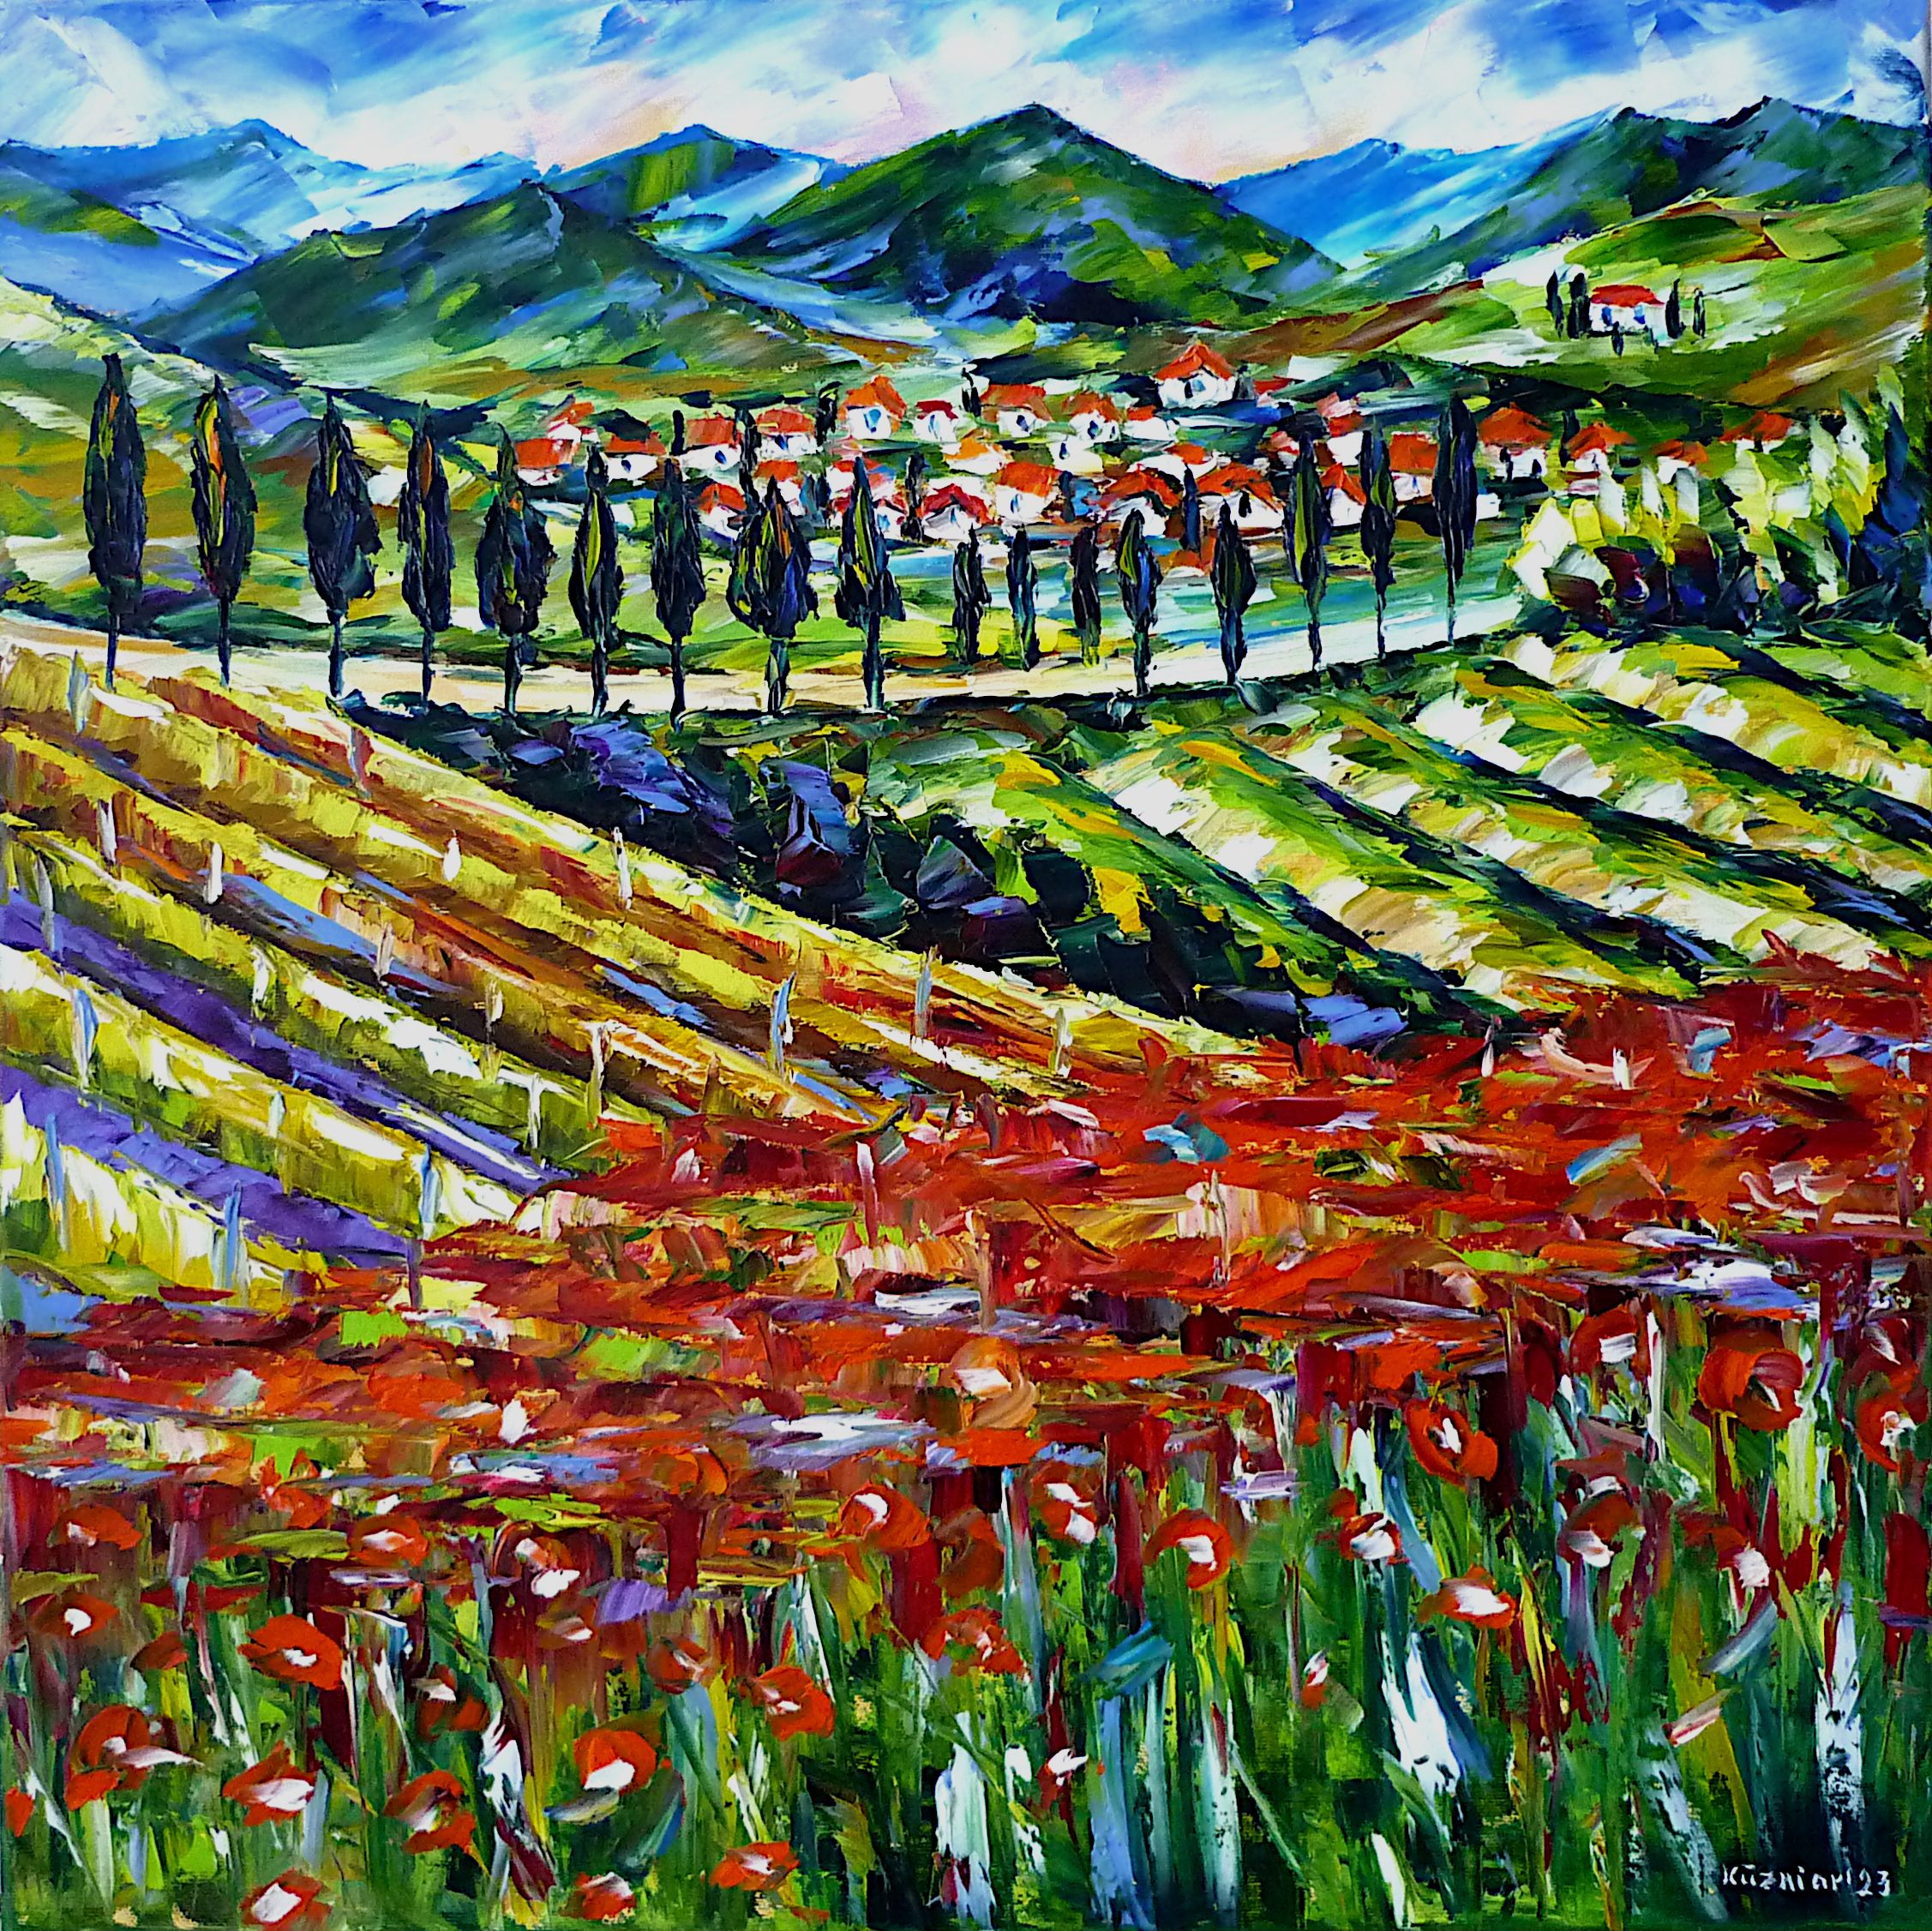 tuscany picture,tuscany painting,fields of tuscany,toscana painting,tuscany art,tuscany poppy fields,red poppy fields,cypresses,village in tuscany,mountains of tuscany,chianti,colline del chianti,monti del chianti,beautiful tuscany,tuscany beauty,summer landscape,summer painting,summer feelings,summer in tuscany,landscape painting,tuscany love,tuscany lover,i love tuscany,tuscany abstract,italy,tuscany idyll,country idyll,italian landscape,beautiful italy,square painting,square format,square picture,palette knife oil painting,modern art,figurative art,figurative painting,contemporary painting,abstract painting,lively colors,colorful painting,bright colors,impasto painting